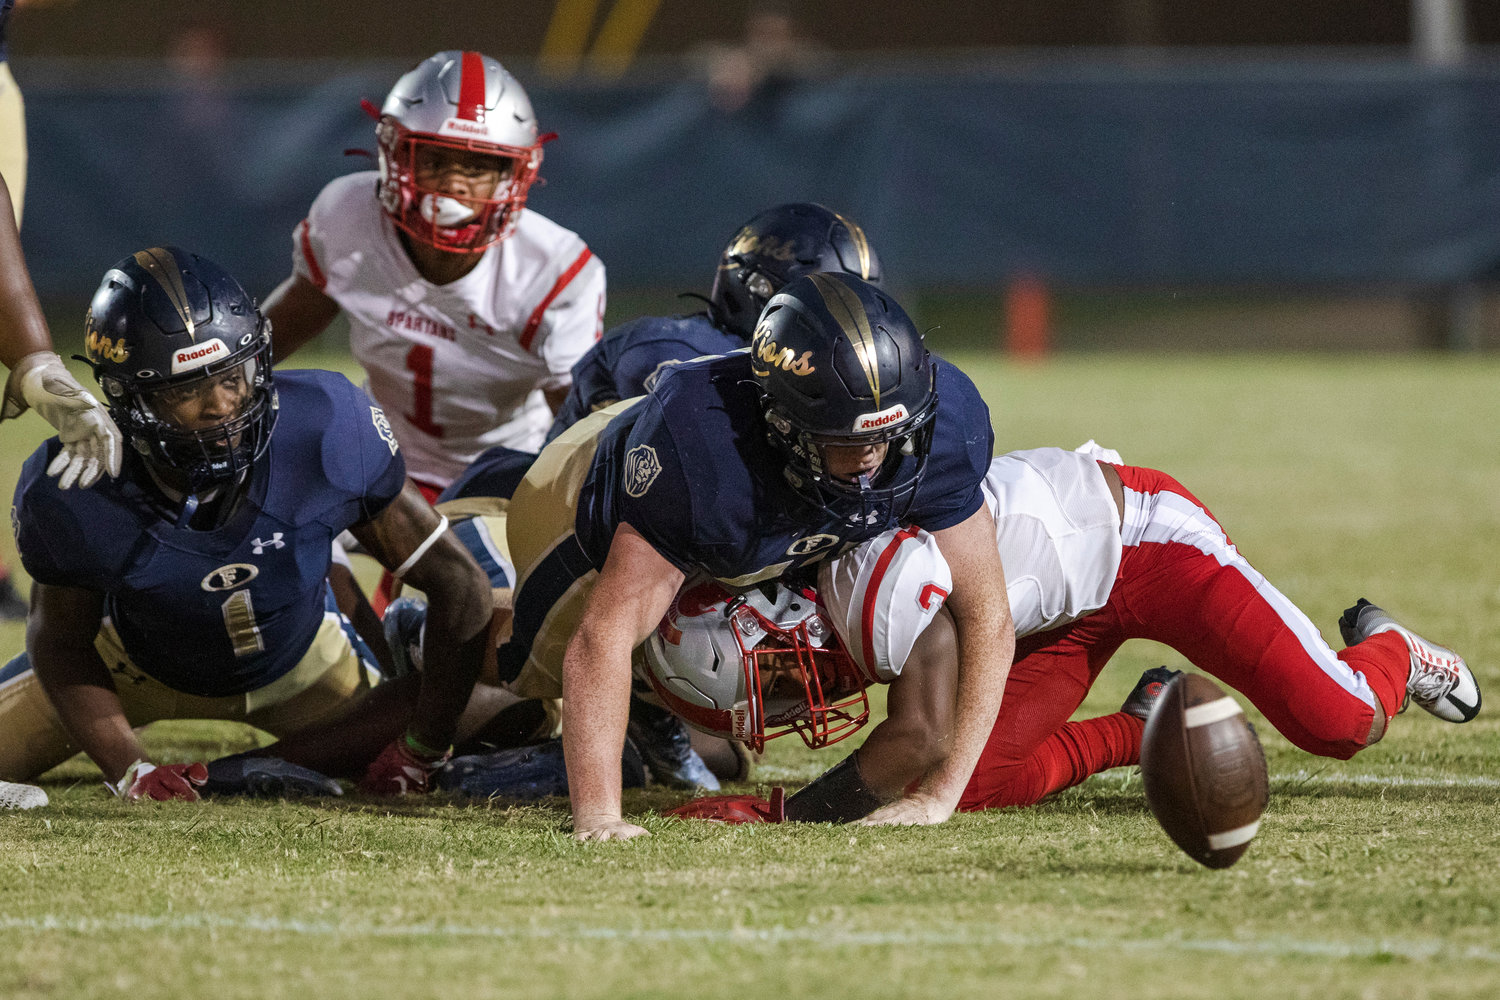 The Foley defense looks to fall on a lost fumble from Saraland’s Ryan Williams during the non-region contest at Ivan Jones Stadium Friday night. The Spartans beat the Lions 49-21.